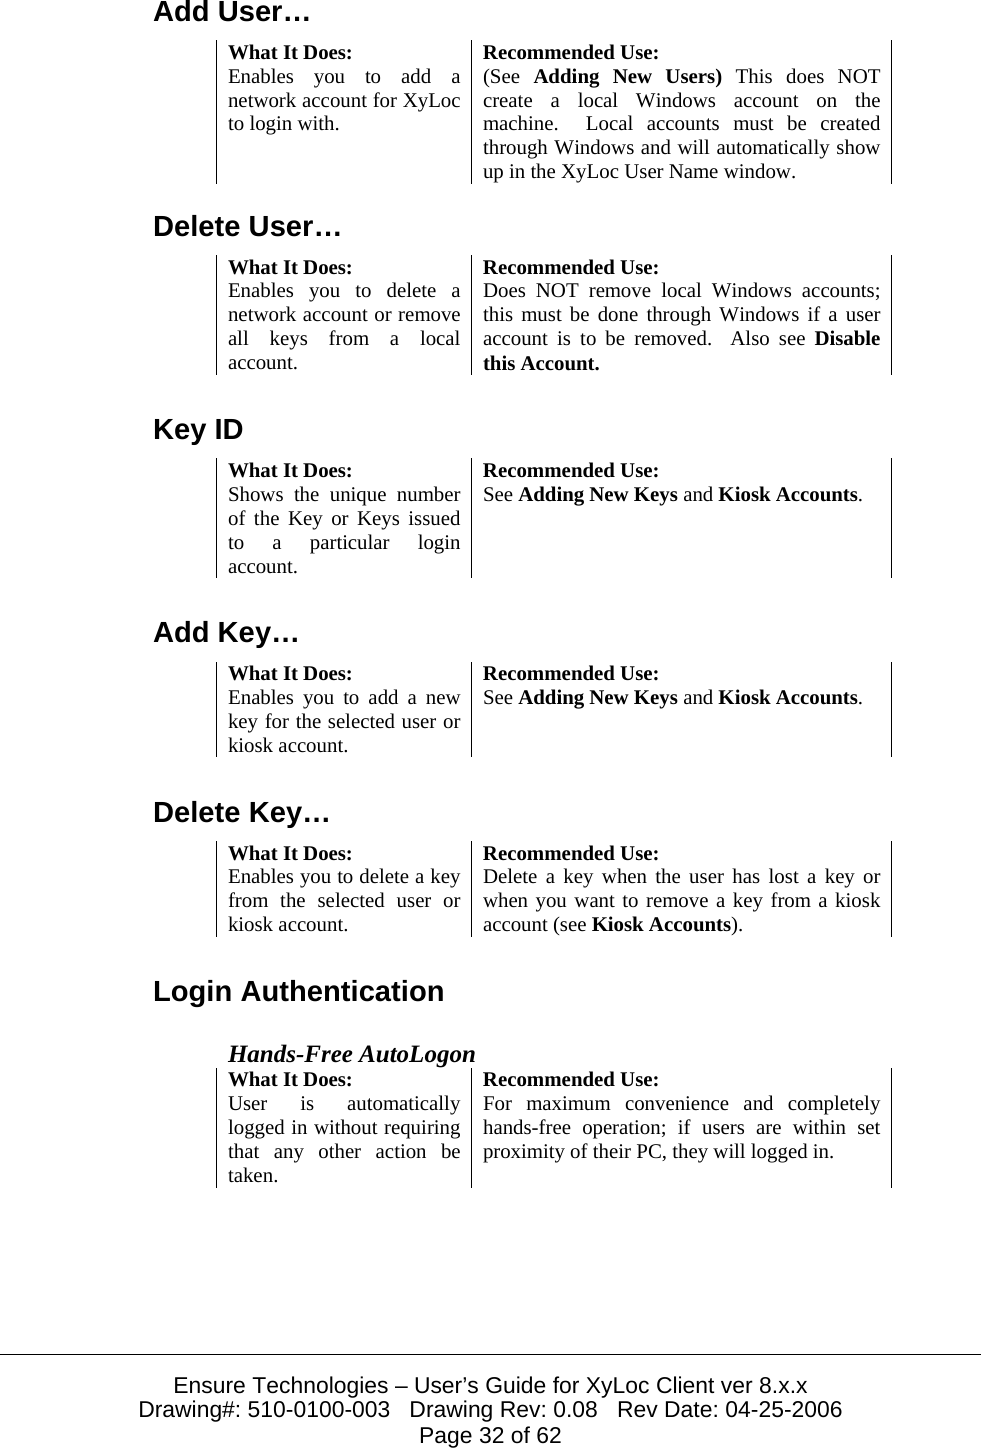  Ensure Technologies – User’s Guide for XyLoc Client ver 8.x.x Drawing#: 510-0100-003   Drawing Rev: 0.08   Rev Date: 04-25-2006 Page 32 of 62 Add User… What It Does:  Recommended Use: Enables you to add a network account for XyLoc to login with. (See  Adding New Users) This does NOT create a local Windows account on the machine.  Local accounts must be created through Windows and will automatically show up in the XyLoc User Name window. Delete User… What It Does:  Recommended Use: Enables you to delete a network account or remove all keys from a local account. Does NOT remove local Windows accounts; this must be done through Windows if a user account is to be removed.  Also see Disable this Account.Key ID What It Does:  Recommended Use: Shows the unique number of the Key or Keys issued to a particular login account. See Adding New Keys and Kiosk Accounts. Add Key… What It Does:  Recommended Use: Enables you to add a new key for the selected user or kiosk account. See Adding New Keys and Kiosk Accounts. Delete Key… What It Does:  Recommended Use: Enables you to delete a key from the selected user or kiosk account. Delete a key when the user has lost a key or when you want to remove a key from a kiosk account (see Kiosk Accounts). Login Authentication Hands-Free AutoLogon What It Does:  Recommended Use: User is automatically logged in without requiring that any other action be taken. For maximum convenience and completely hands-free operation; if users are within set proximity of their PC, they will logged in. 